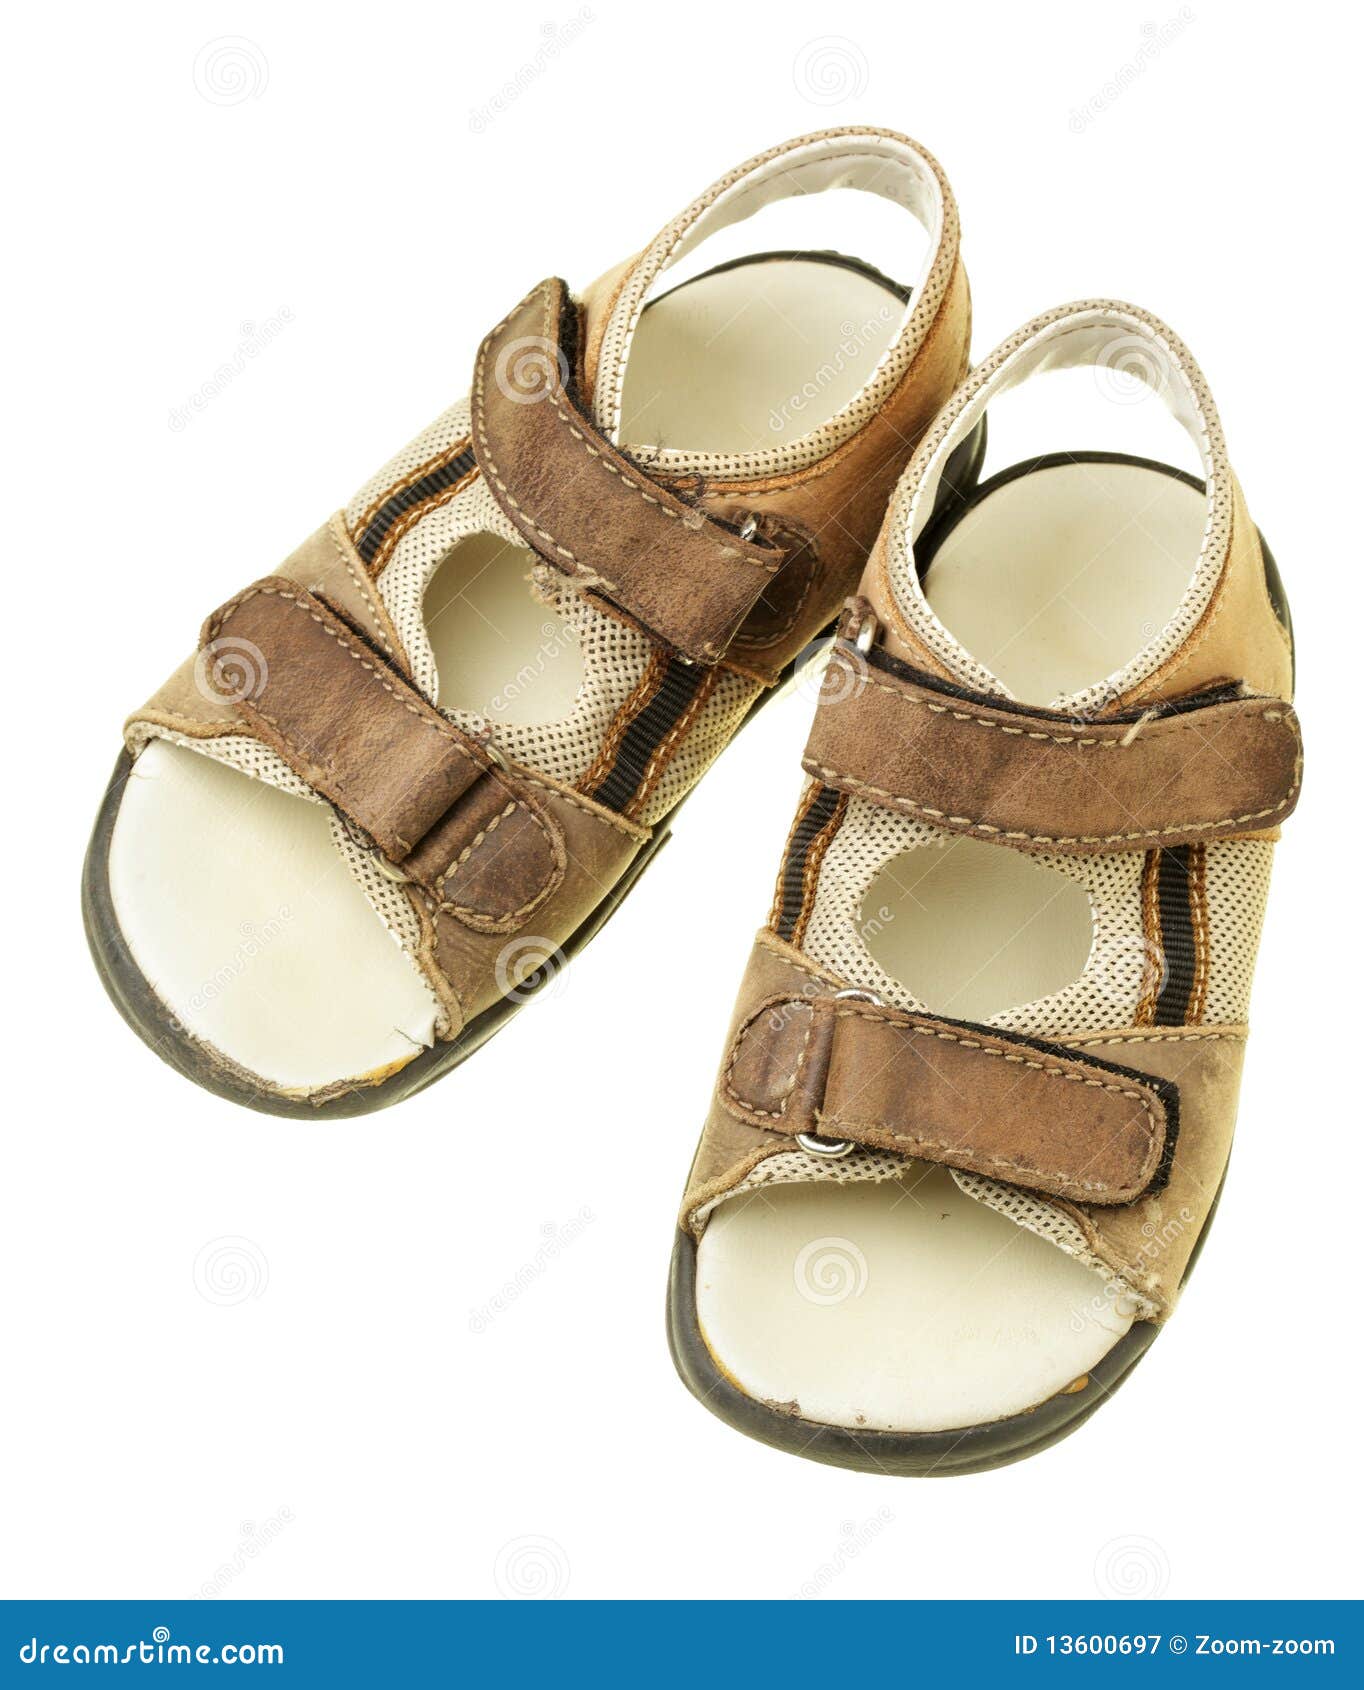 Children s sandals stock image. Image of shoe, lace, colorful - 13600697